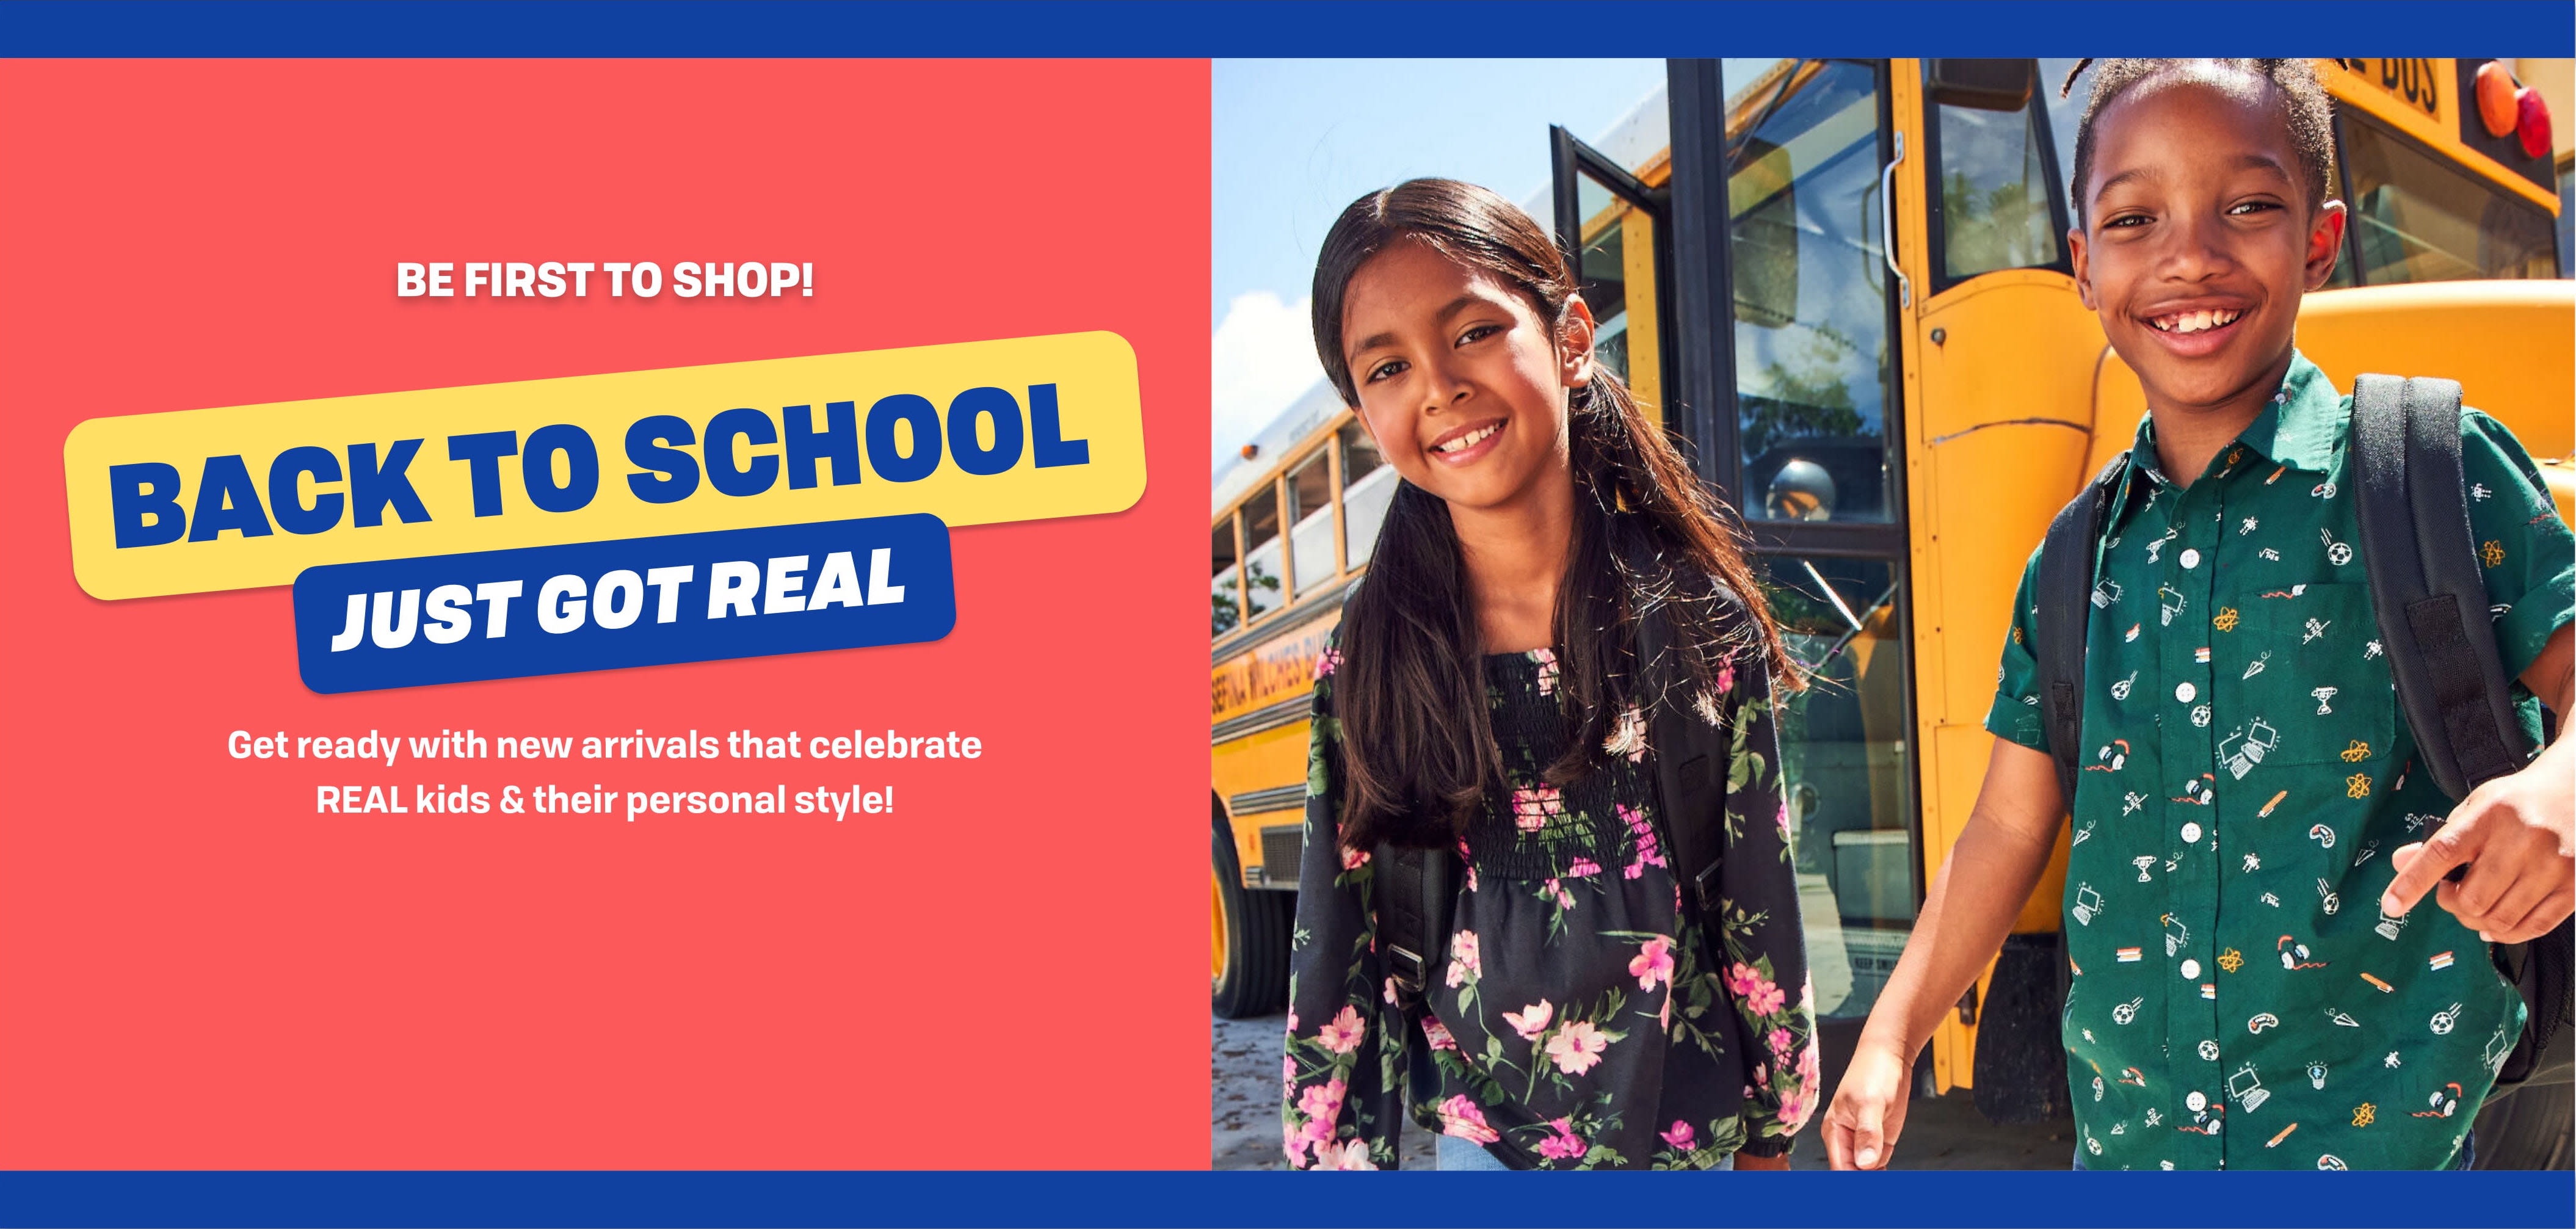 BE FIRST TO SHOP! Back to School just got real. Get Ready with new arrivals that celebrate REAL kids & their personal style.